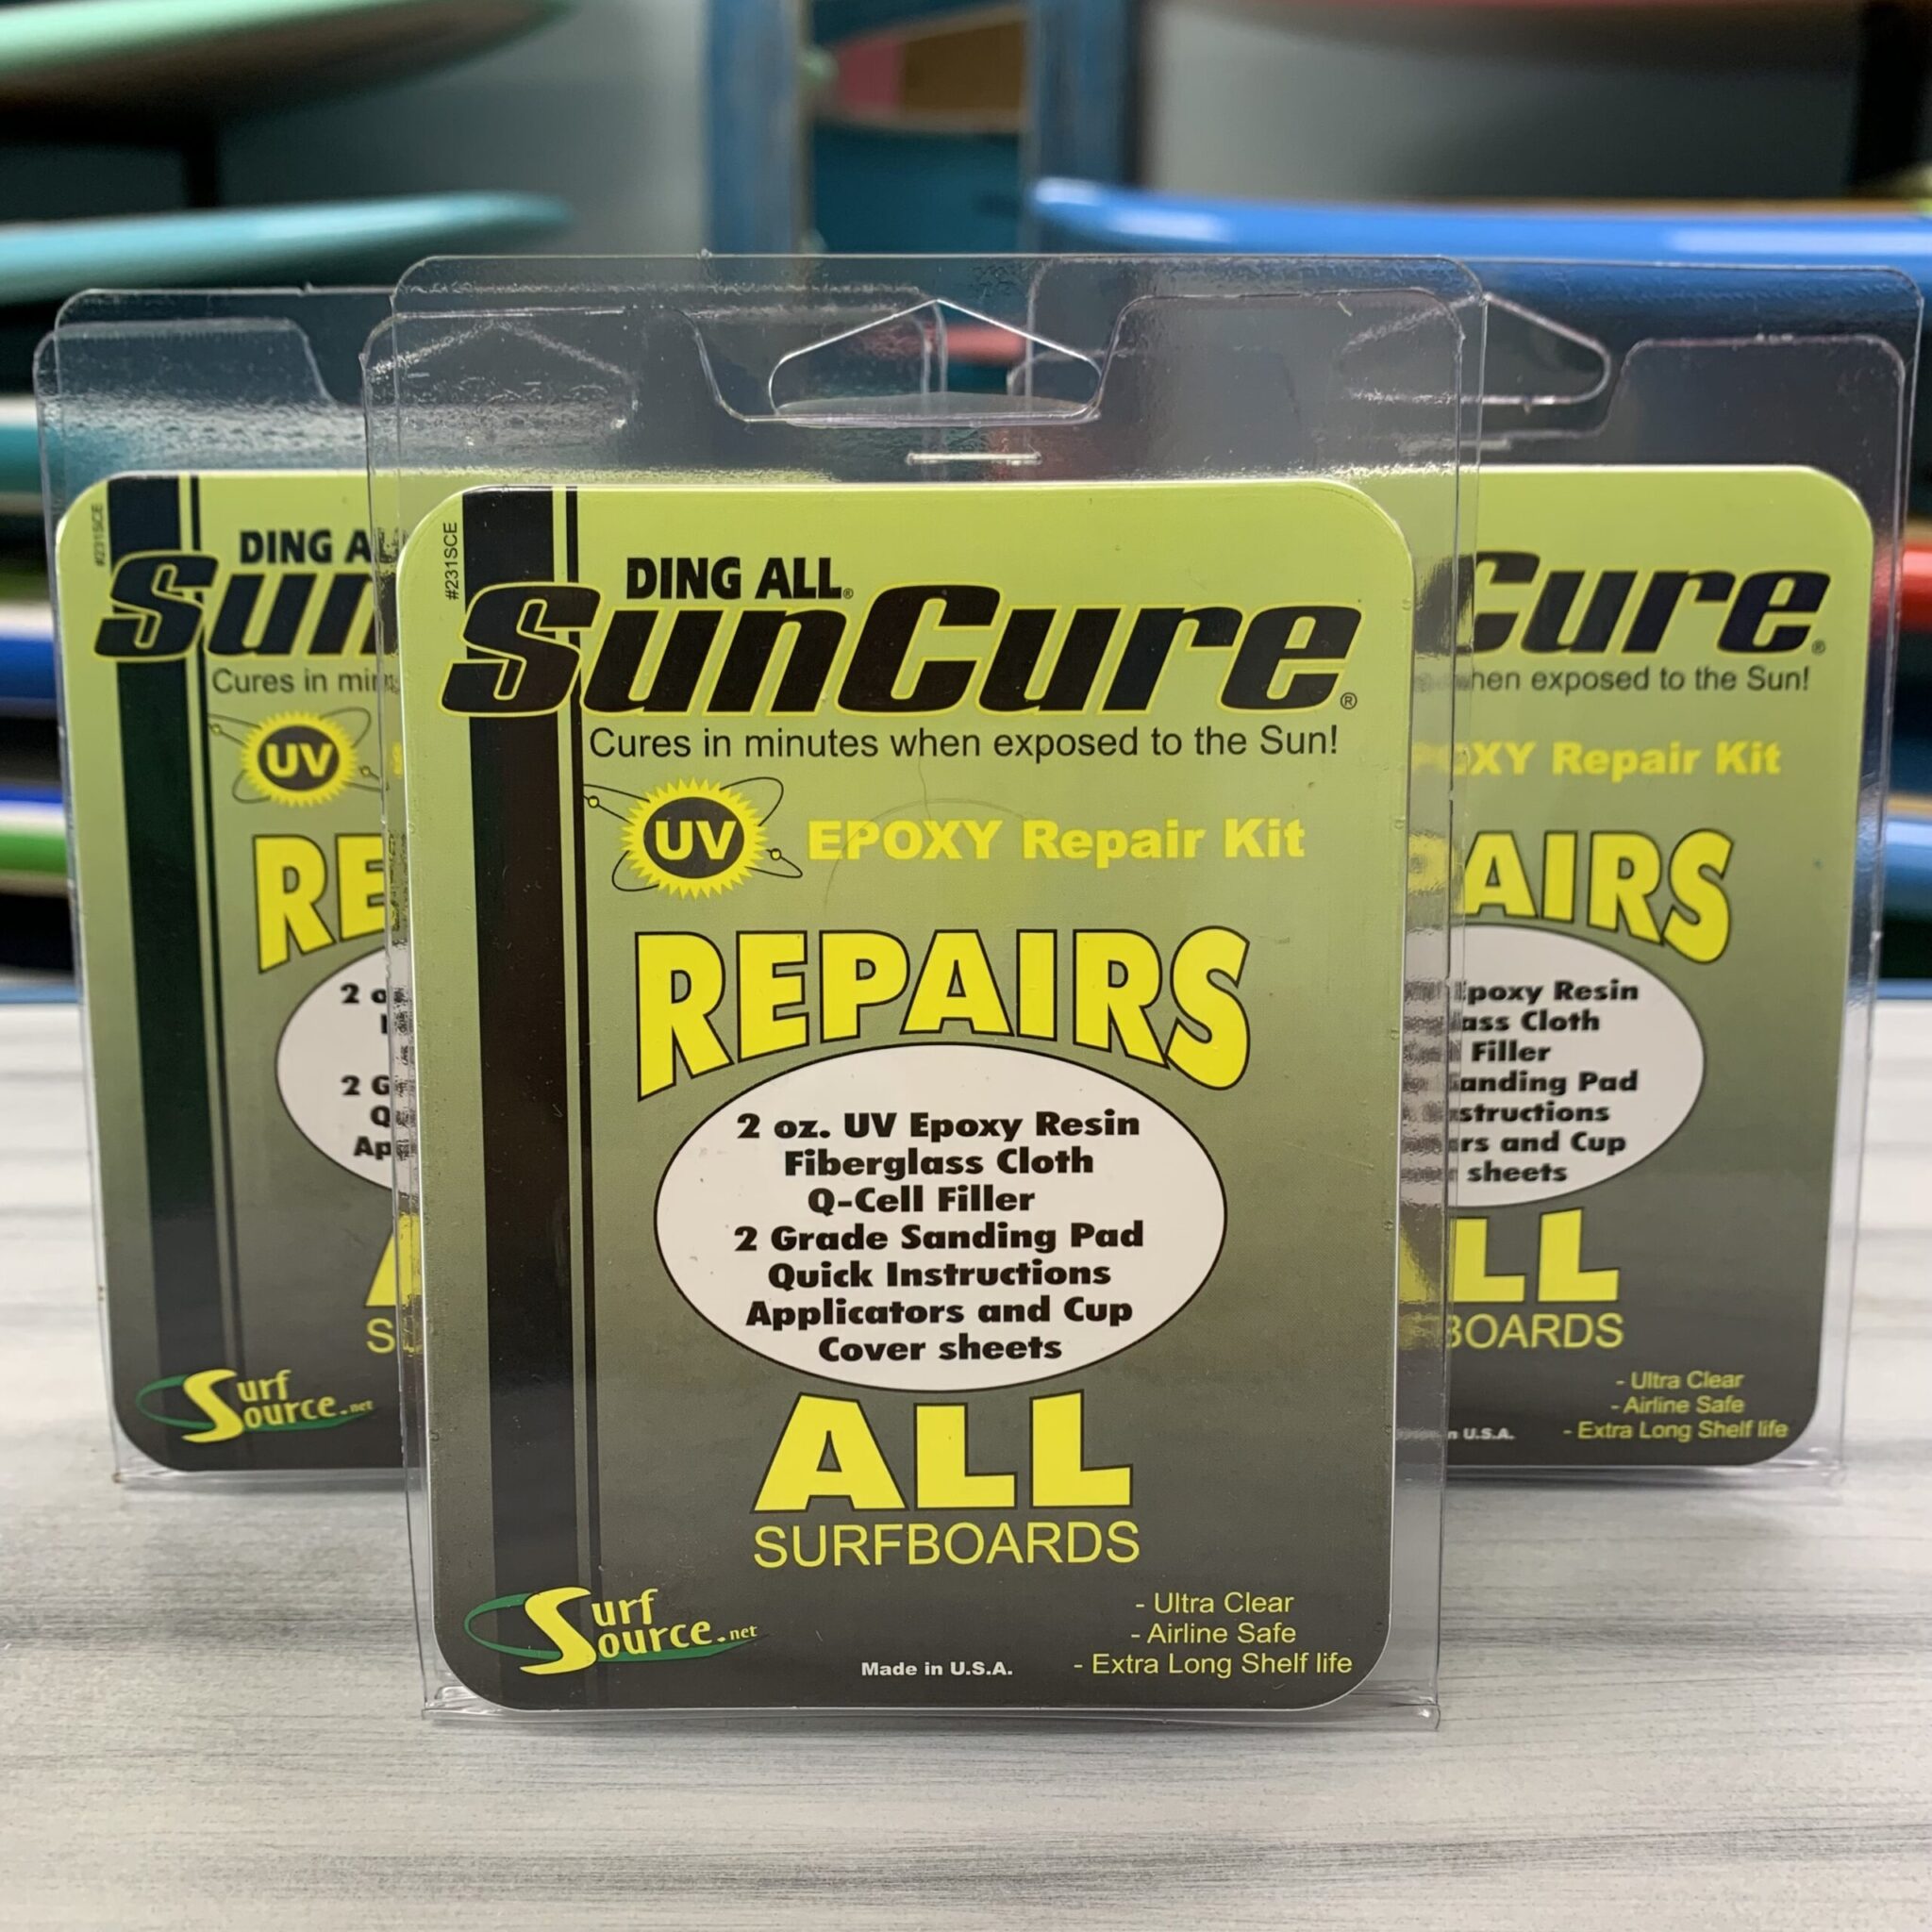 Thin Resin and Pit Filler UV Cure Kit